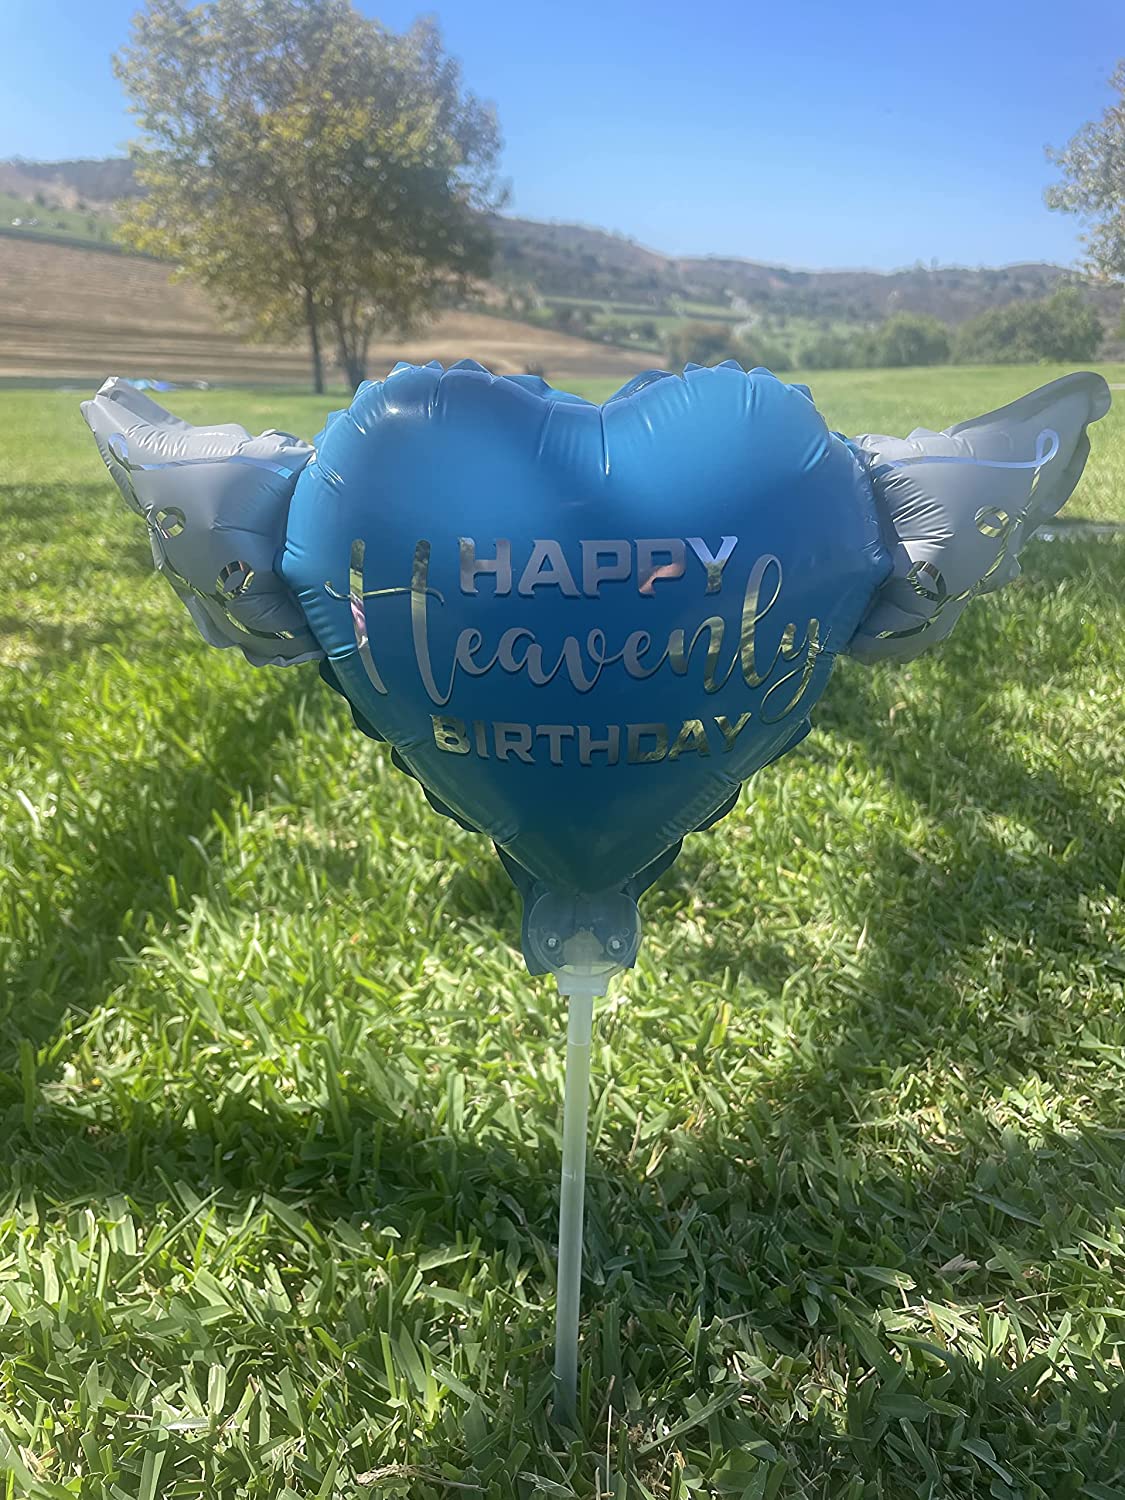 Happy Heavenly Birthday blue balloons on a stick heart shaped with angel wings